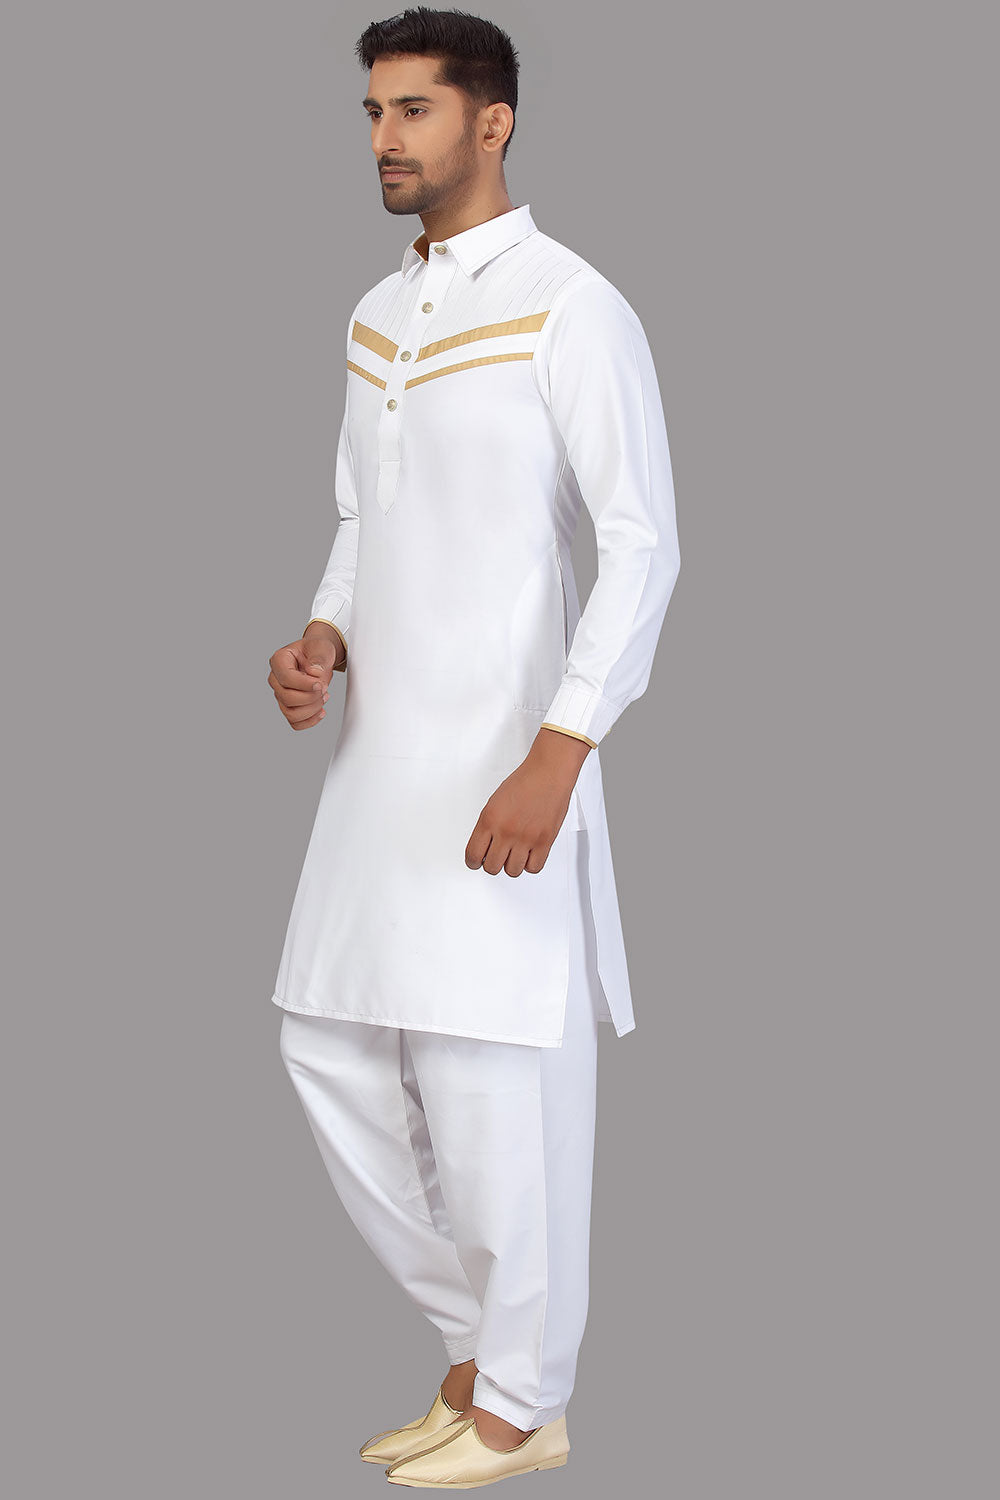 Buy Men's Blended Cotton Solid Pathani Set in White Online - Side